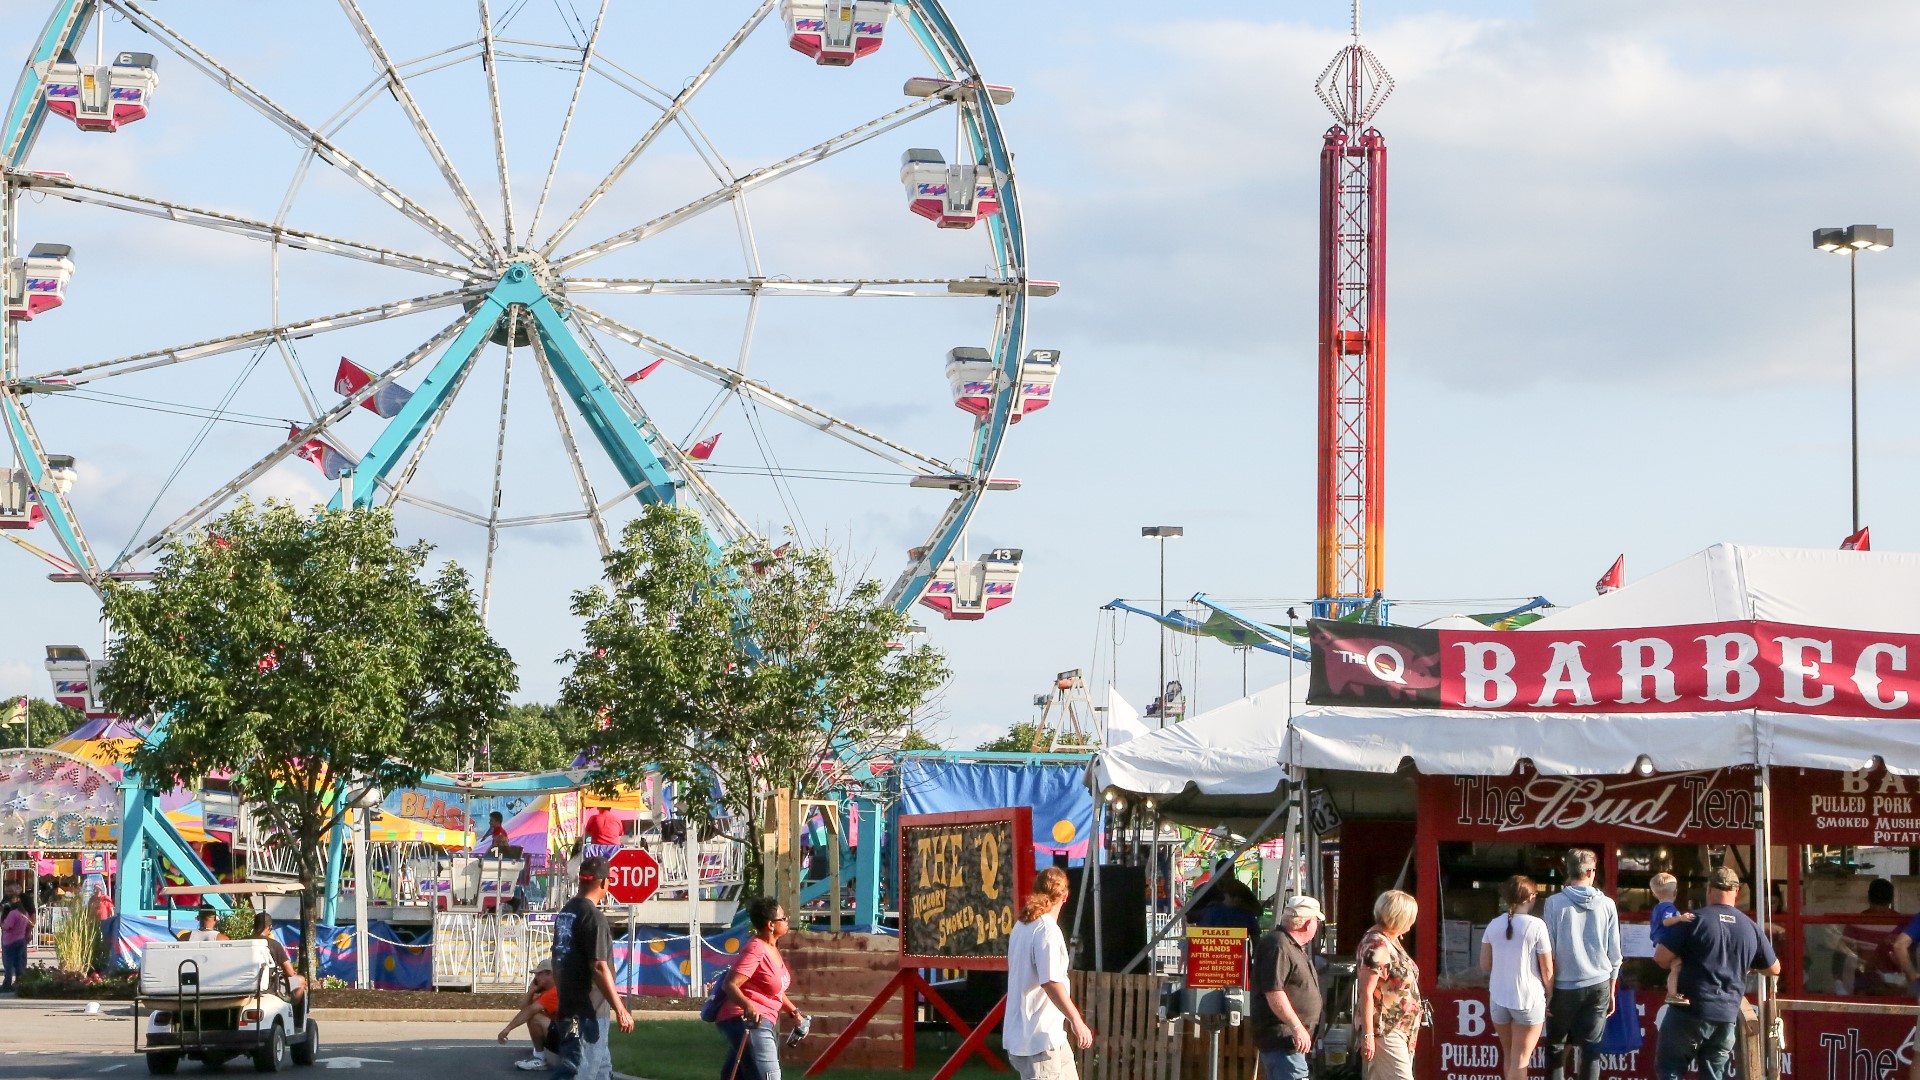 The Kentucky State Fair Board has submitted a draft proposal to Gov. Andy Beshear to hold a modified state fair in August.